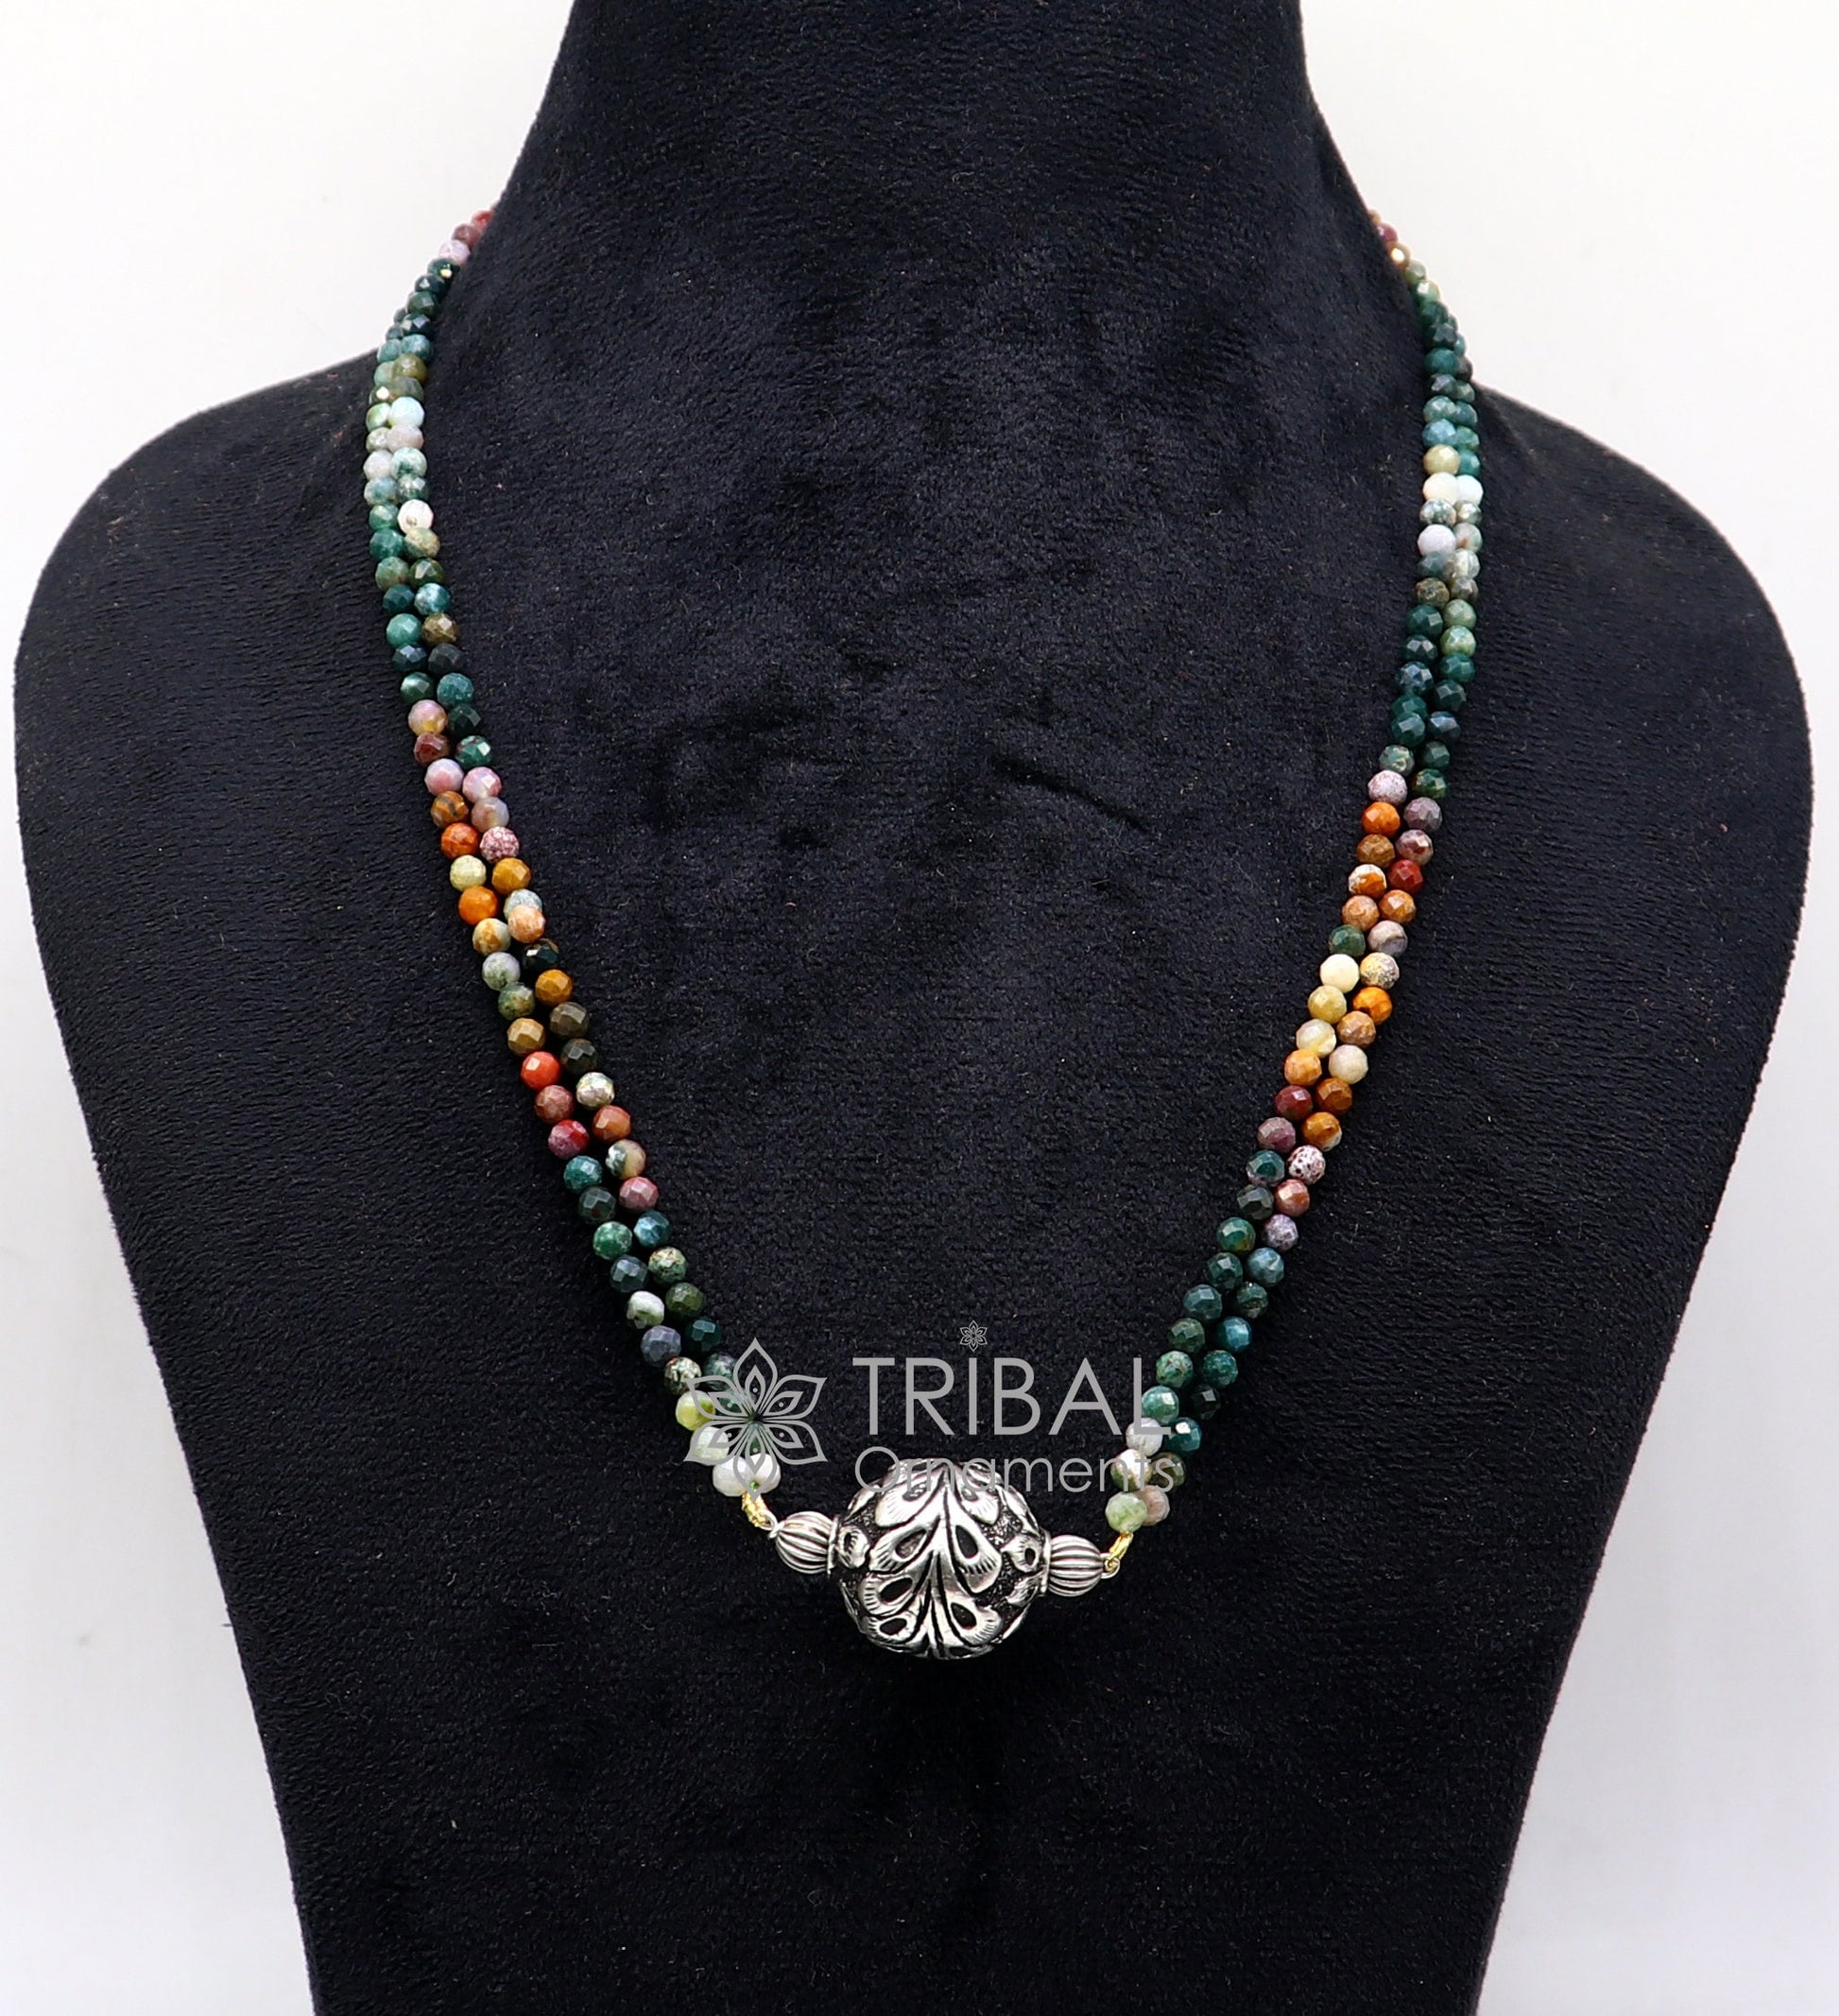 Trendy Indian traditional cultural natural stone beaded 925 sterling silver ball pendant necklace, choker tribal ethnic jewelry set610 - TRIBAL ORNAMENTS